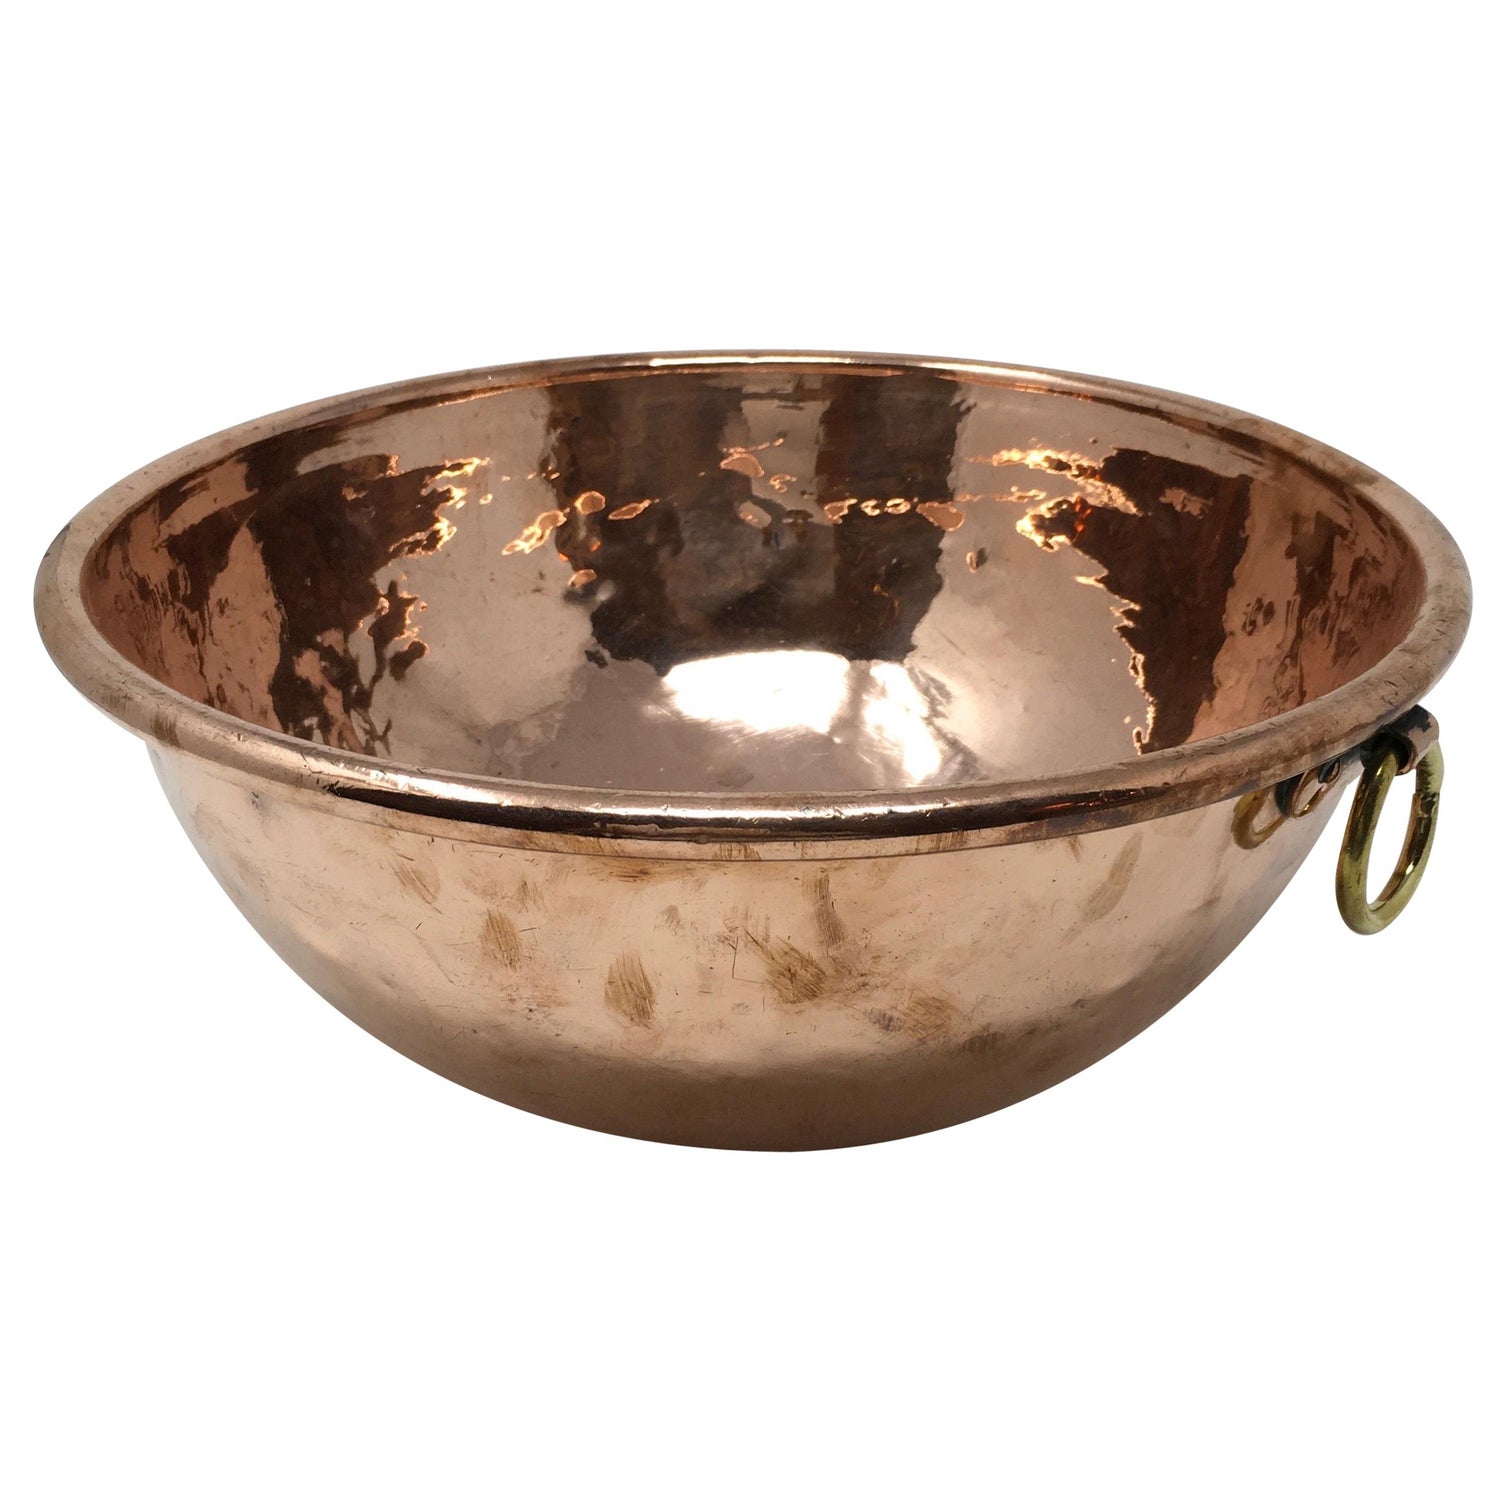 https://a.1stdibscdn.com/large-copper-mixing-bowl-for-sale/1121189/f_197029421594648971308/19702942_master.jpg?width=1500